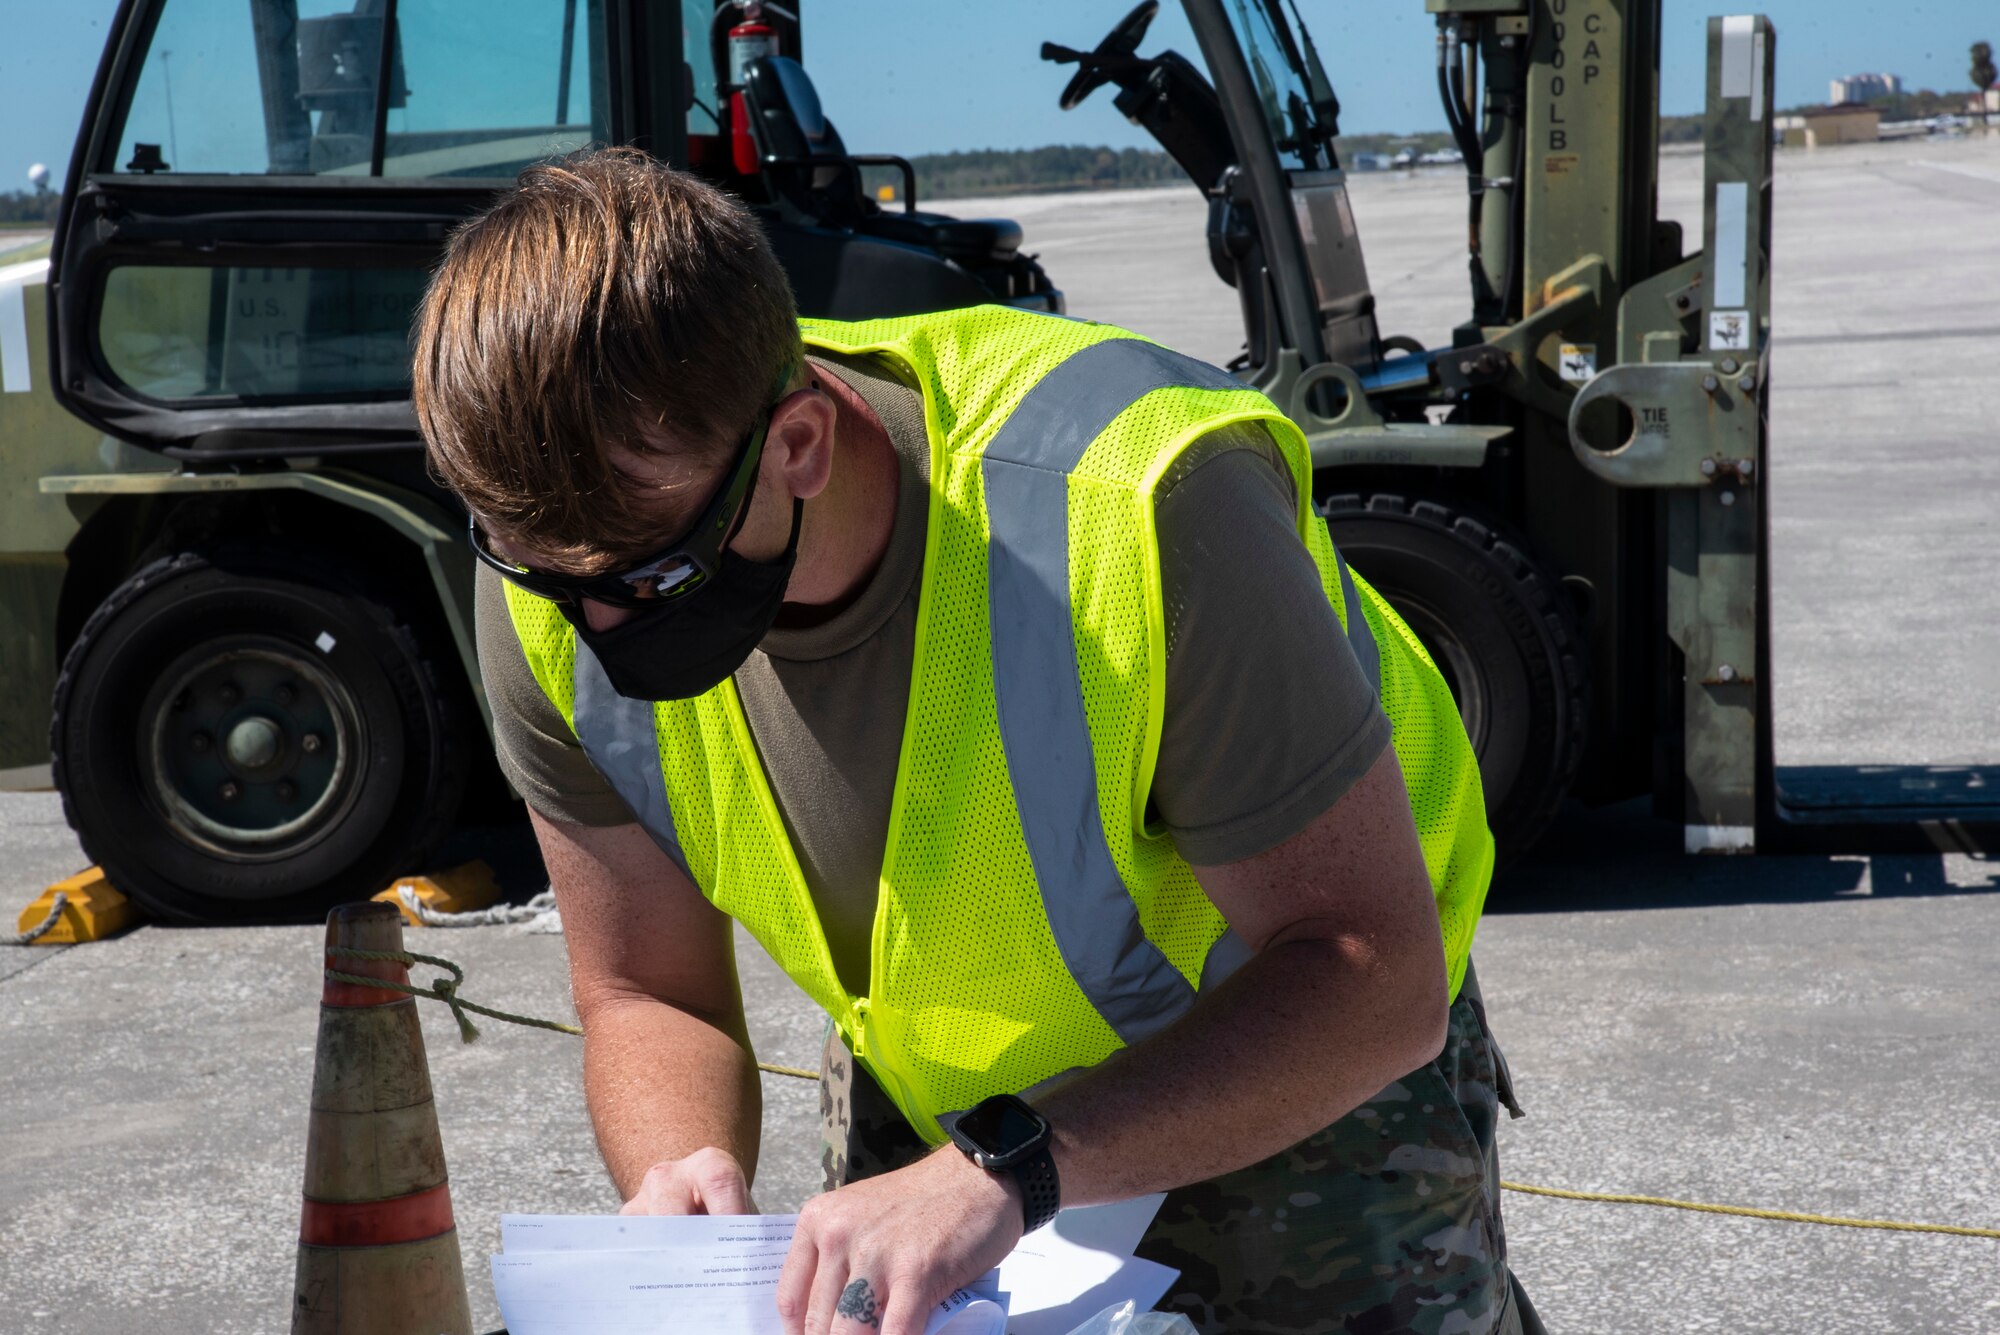 U.S. Air Force Senior Airman Russel Iverson, 6th Logistics Readiness Squadron fleet management and analysis technician, checks an inventory list during an exercise, March 4, 2021, at MacDill Air Force Base, Fla.